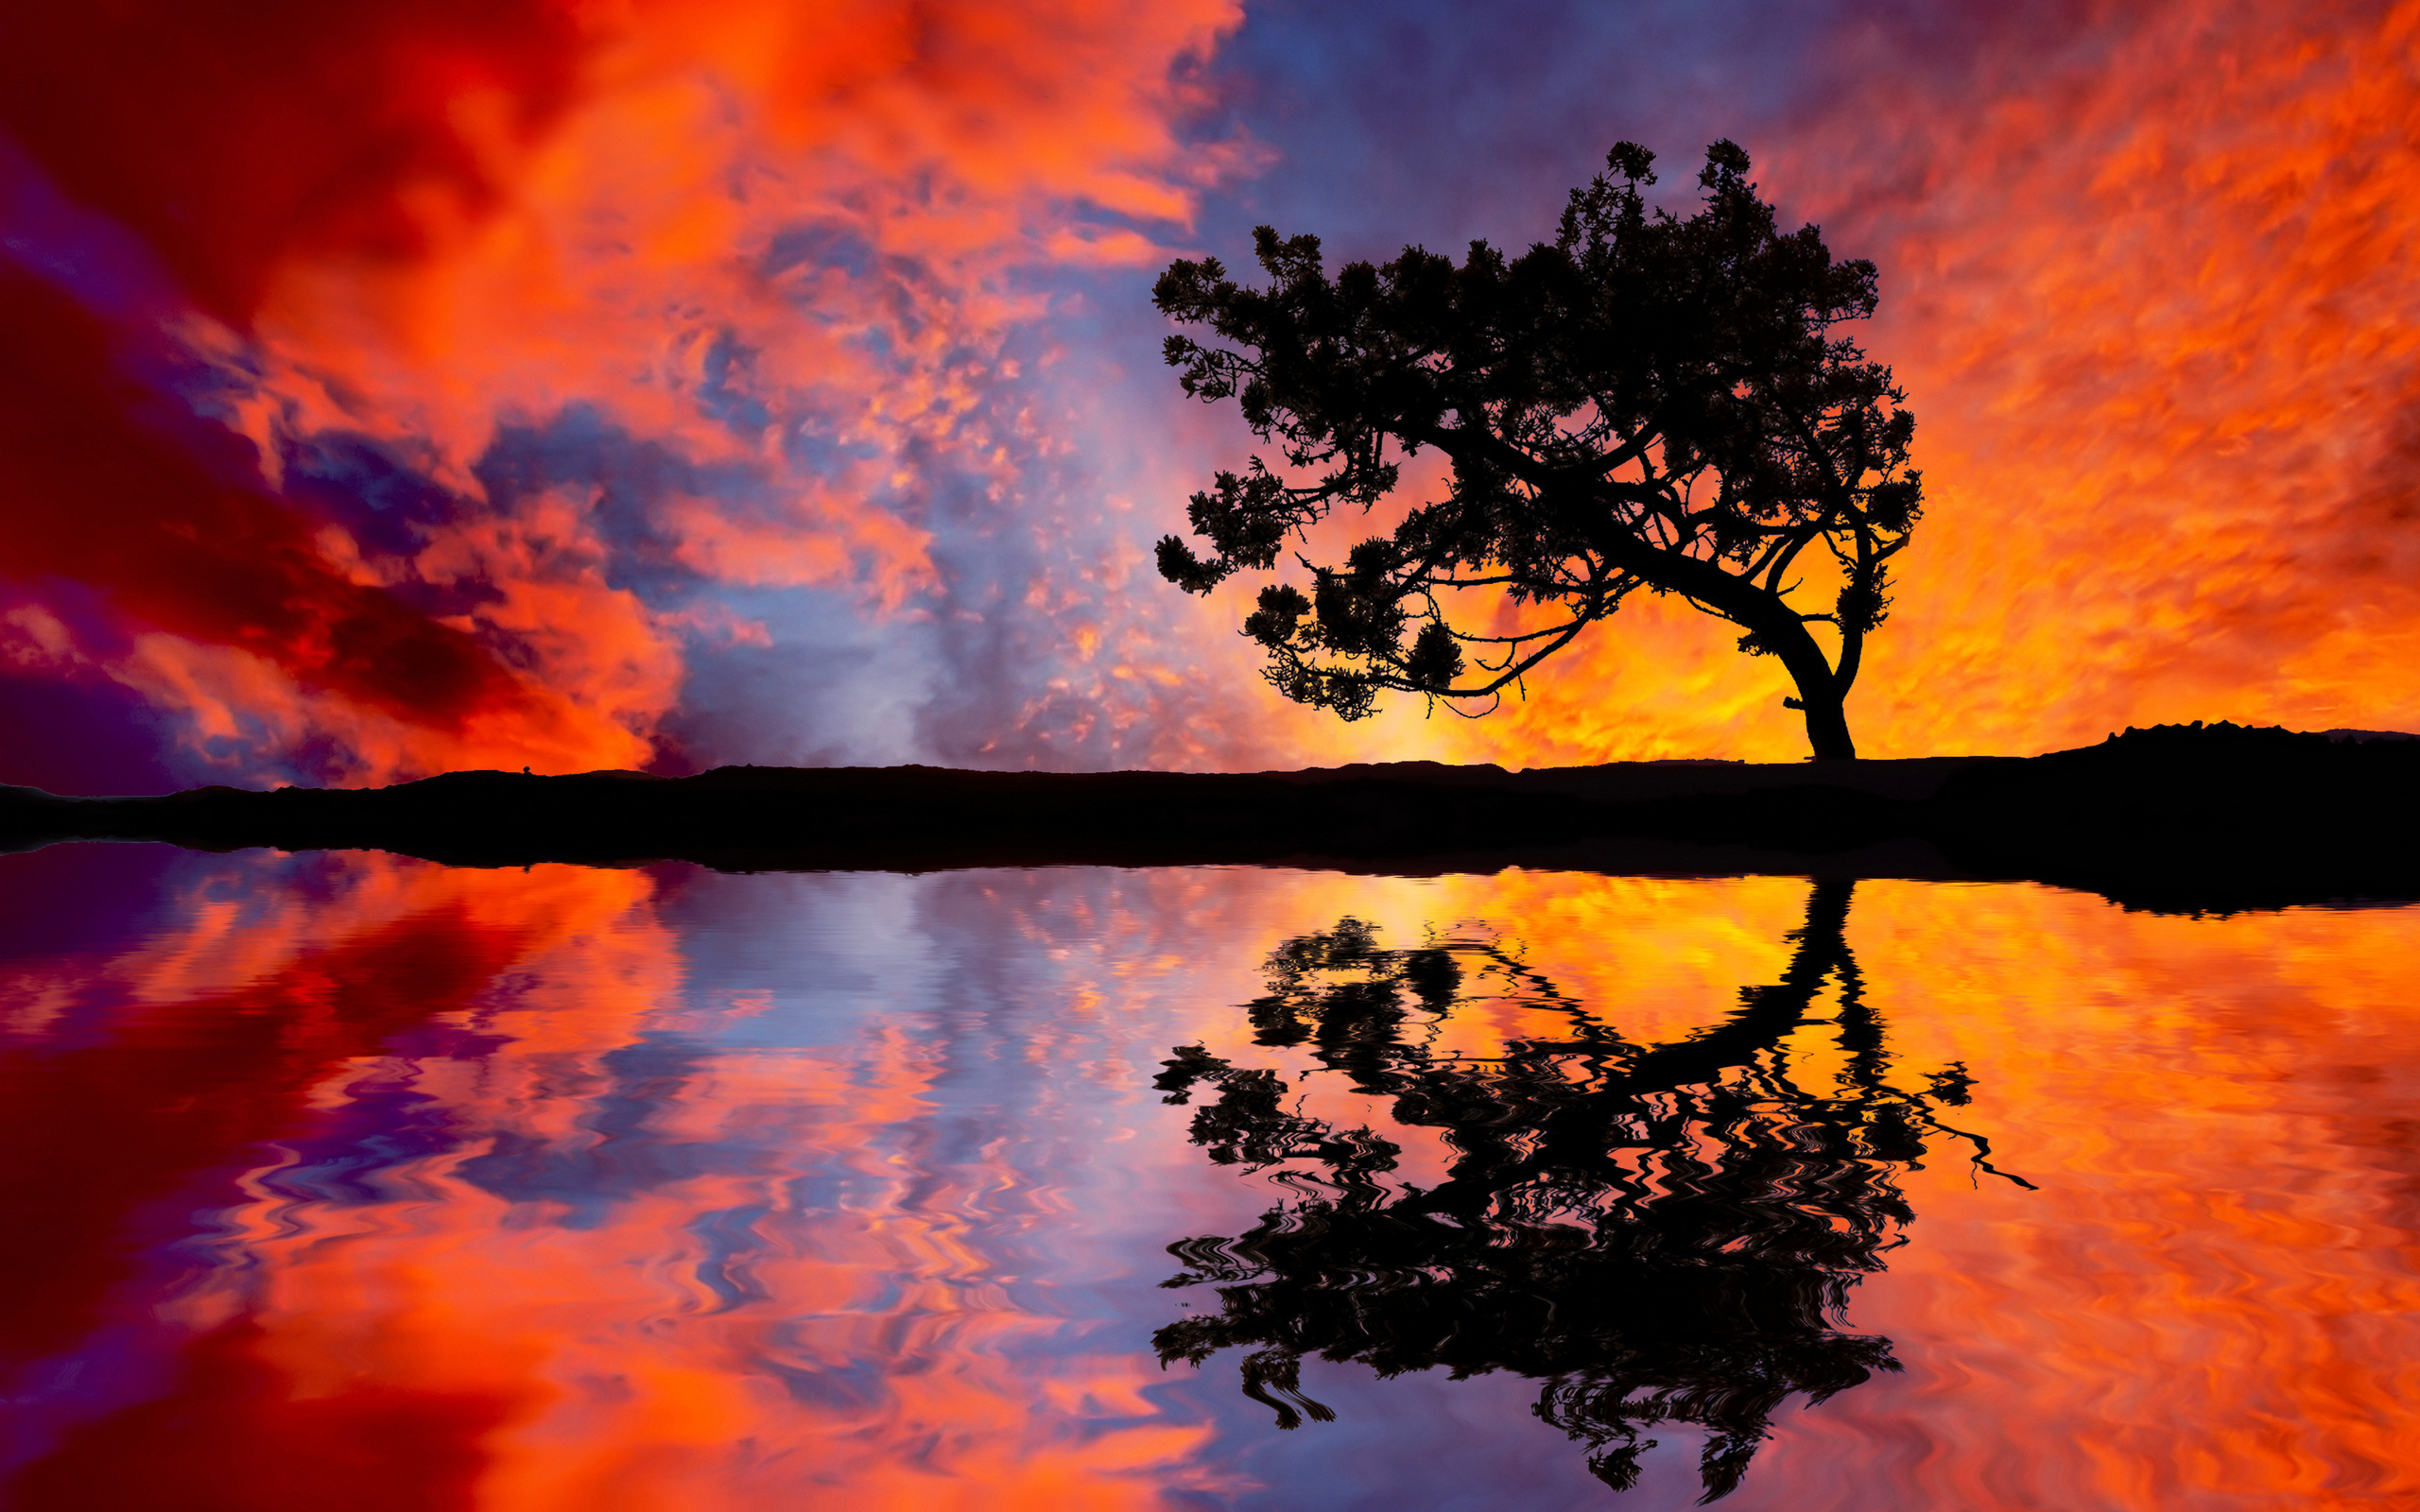 Reflection in Water Tree Sunset - HDWallpaperFX